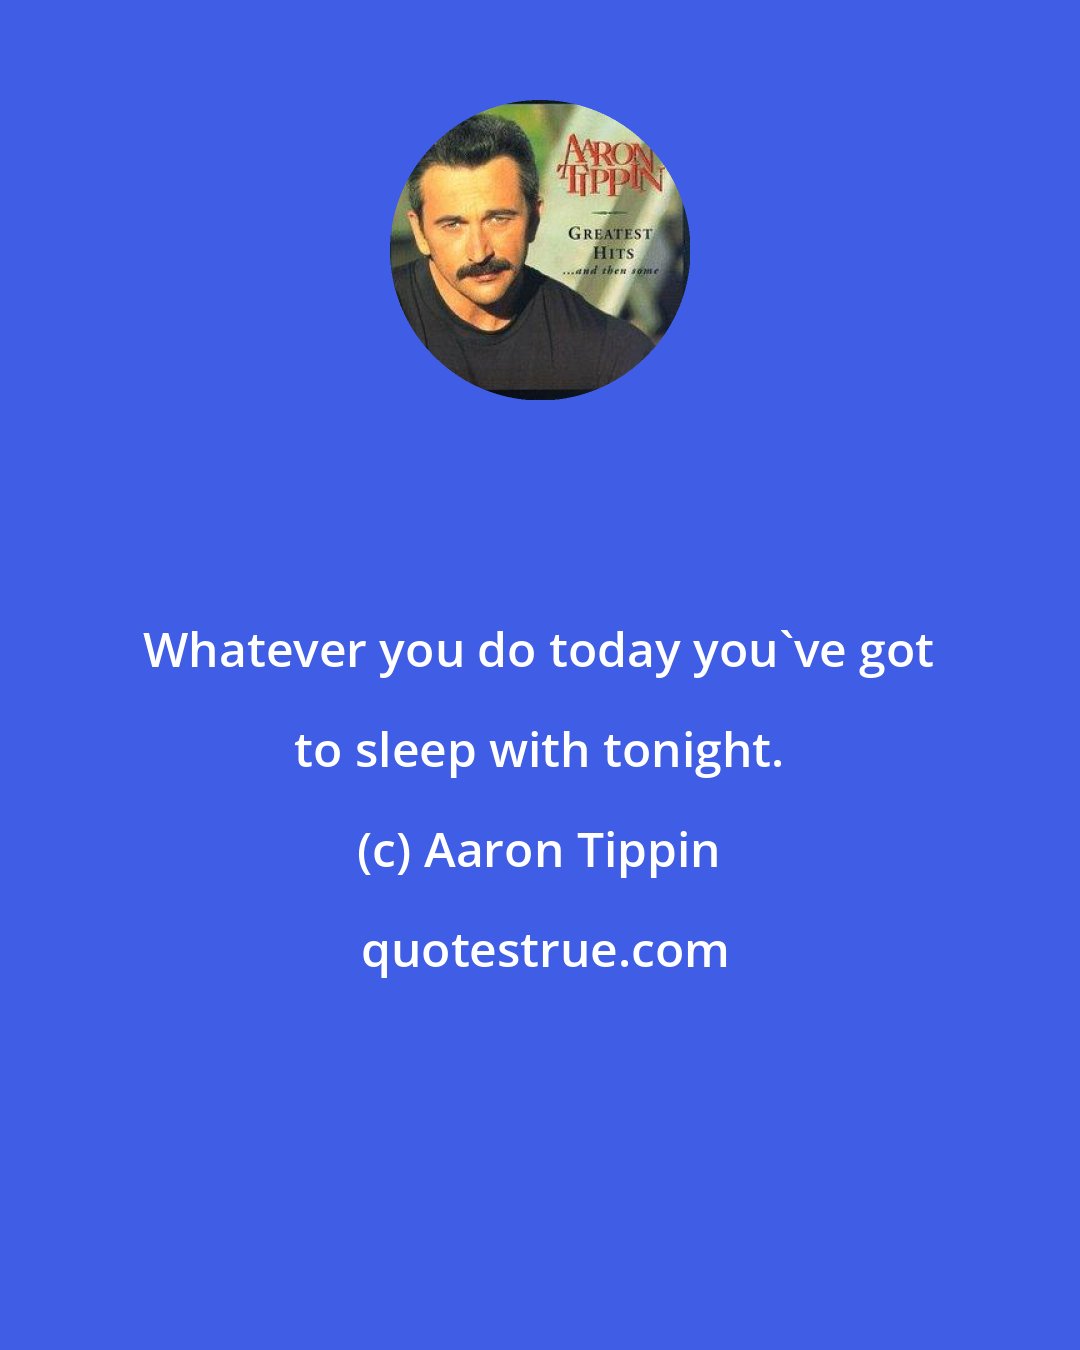 Aaron Tippin: Whatever you do today you've got to sleep with tonight.